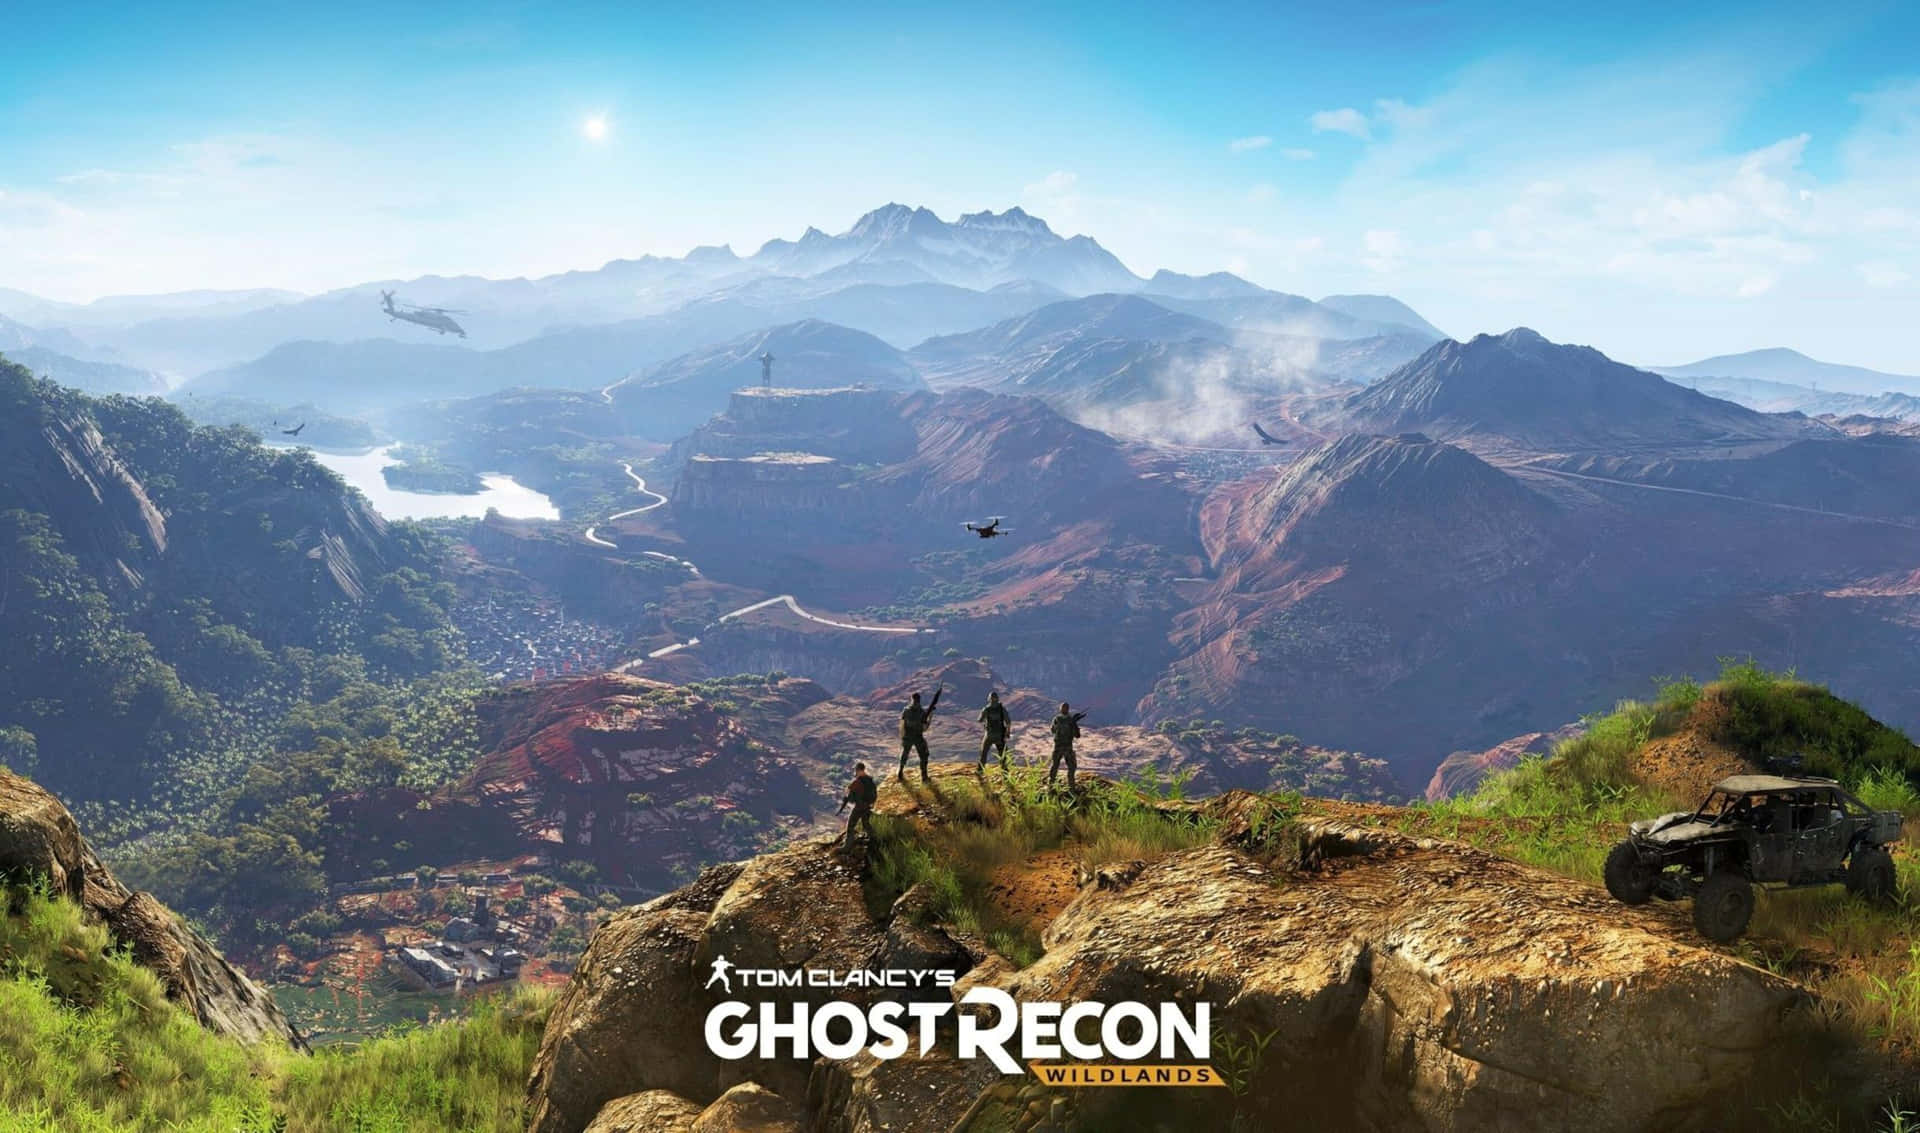 2440x1440 Ghost Recon Wildlands Game Title Poster Mountain Top. Background